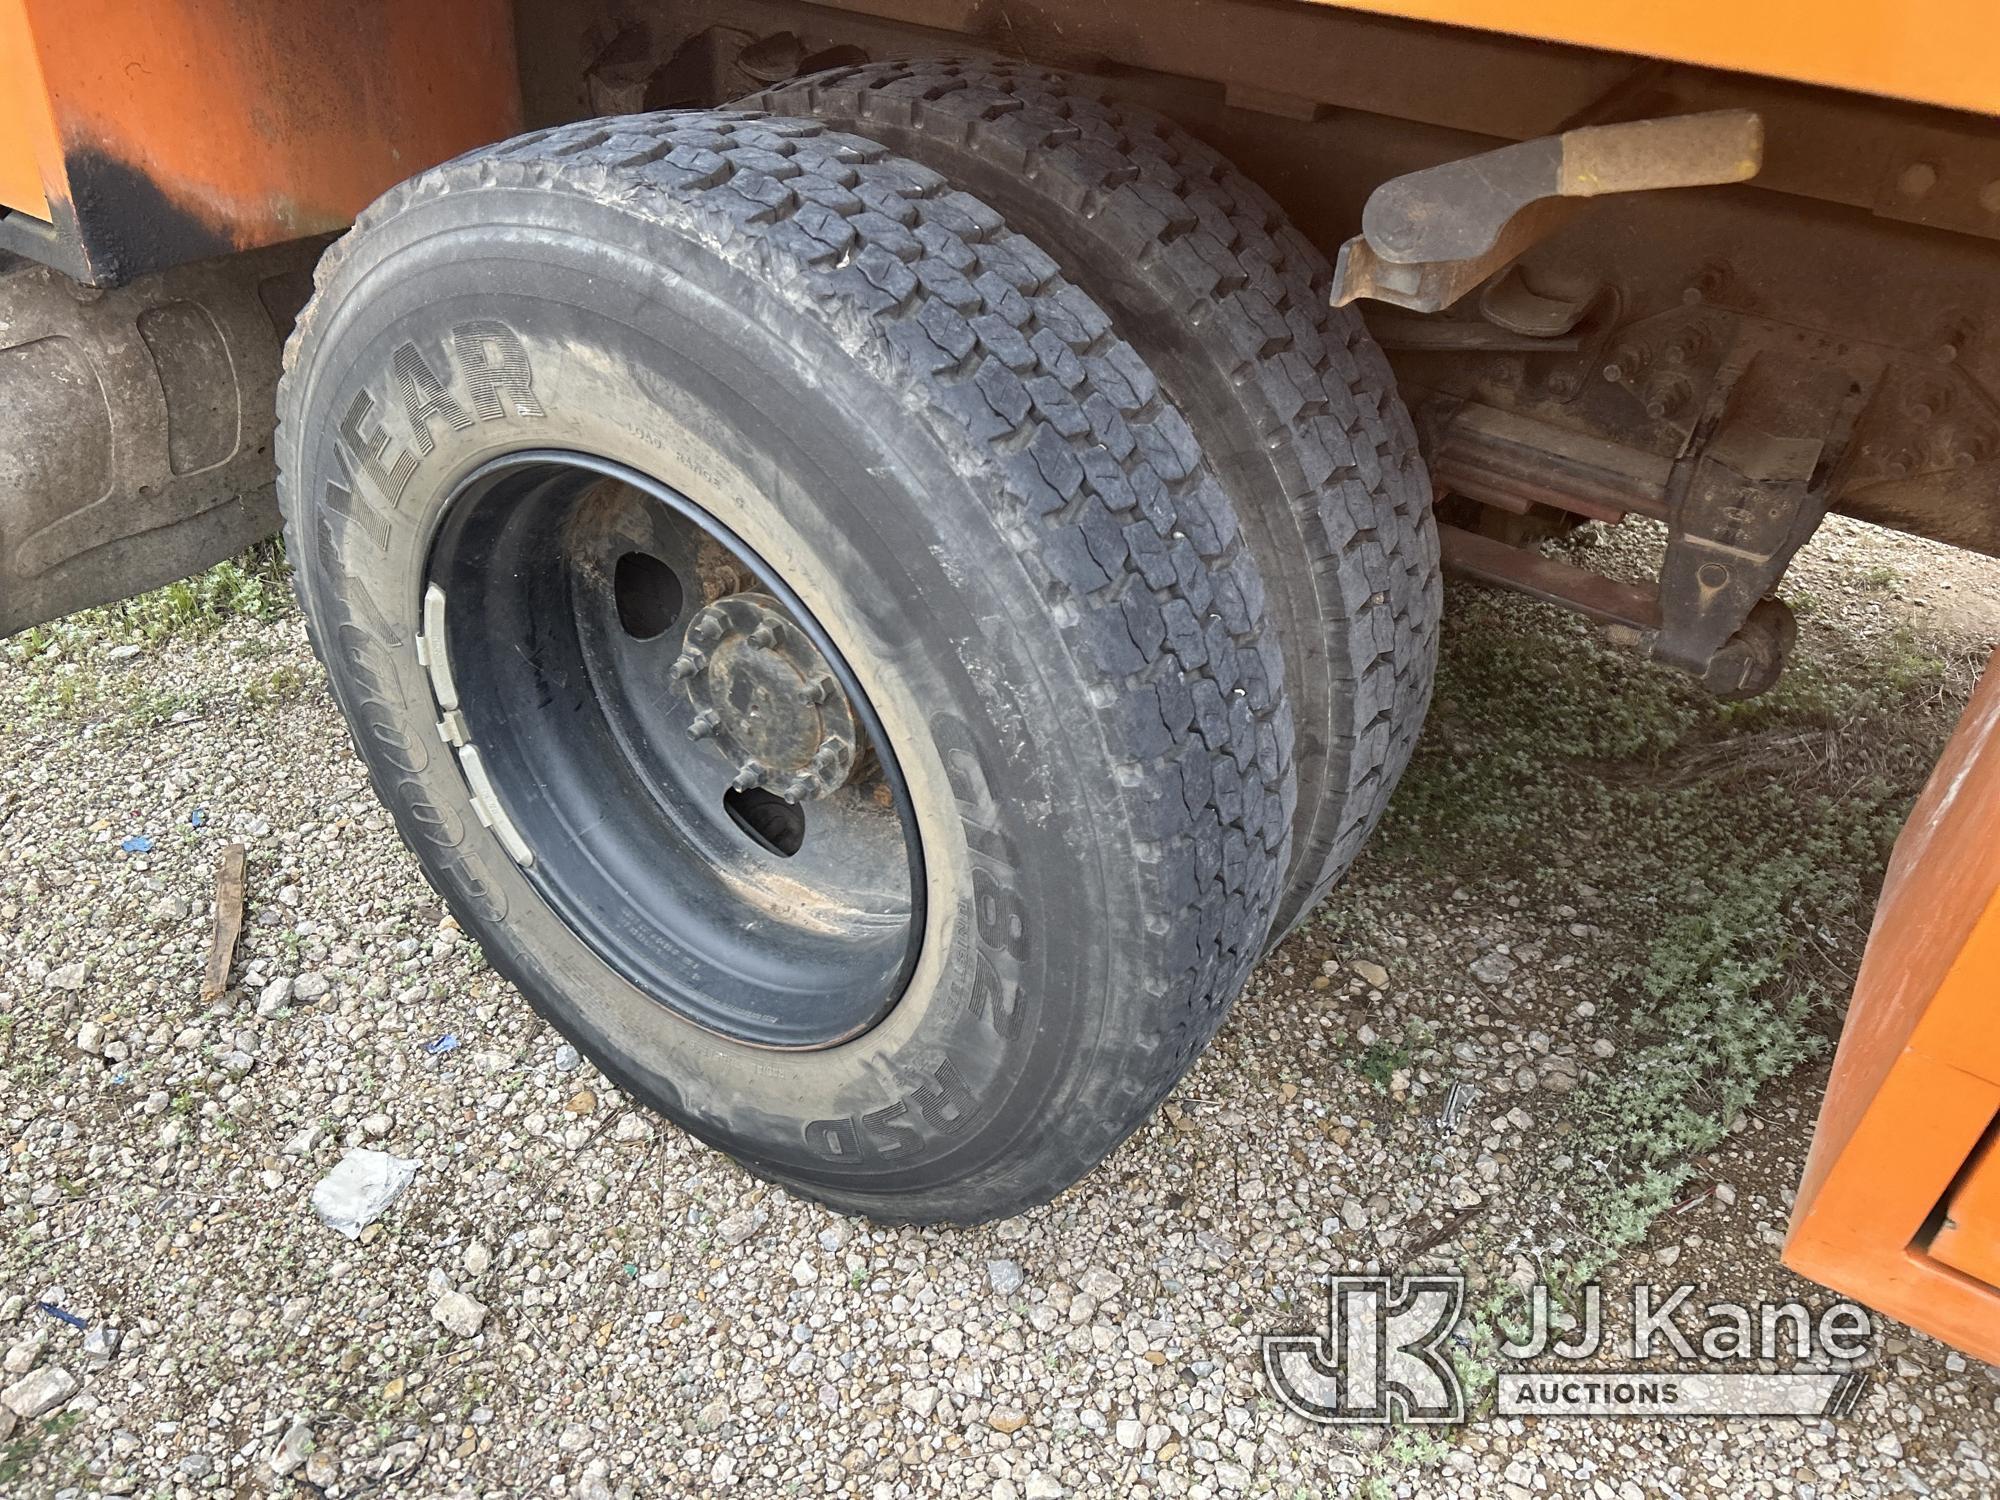 (Waxahachie, TX) 2017 Ford F750 Extended-Cab Chipper Dump Truck Not Running, Wrecked/Totaled, No Key